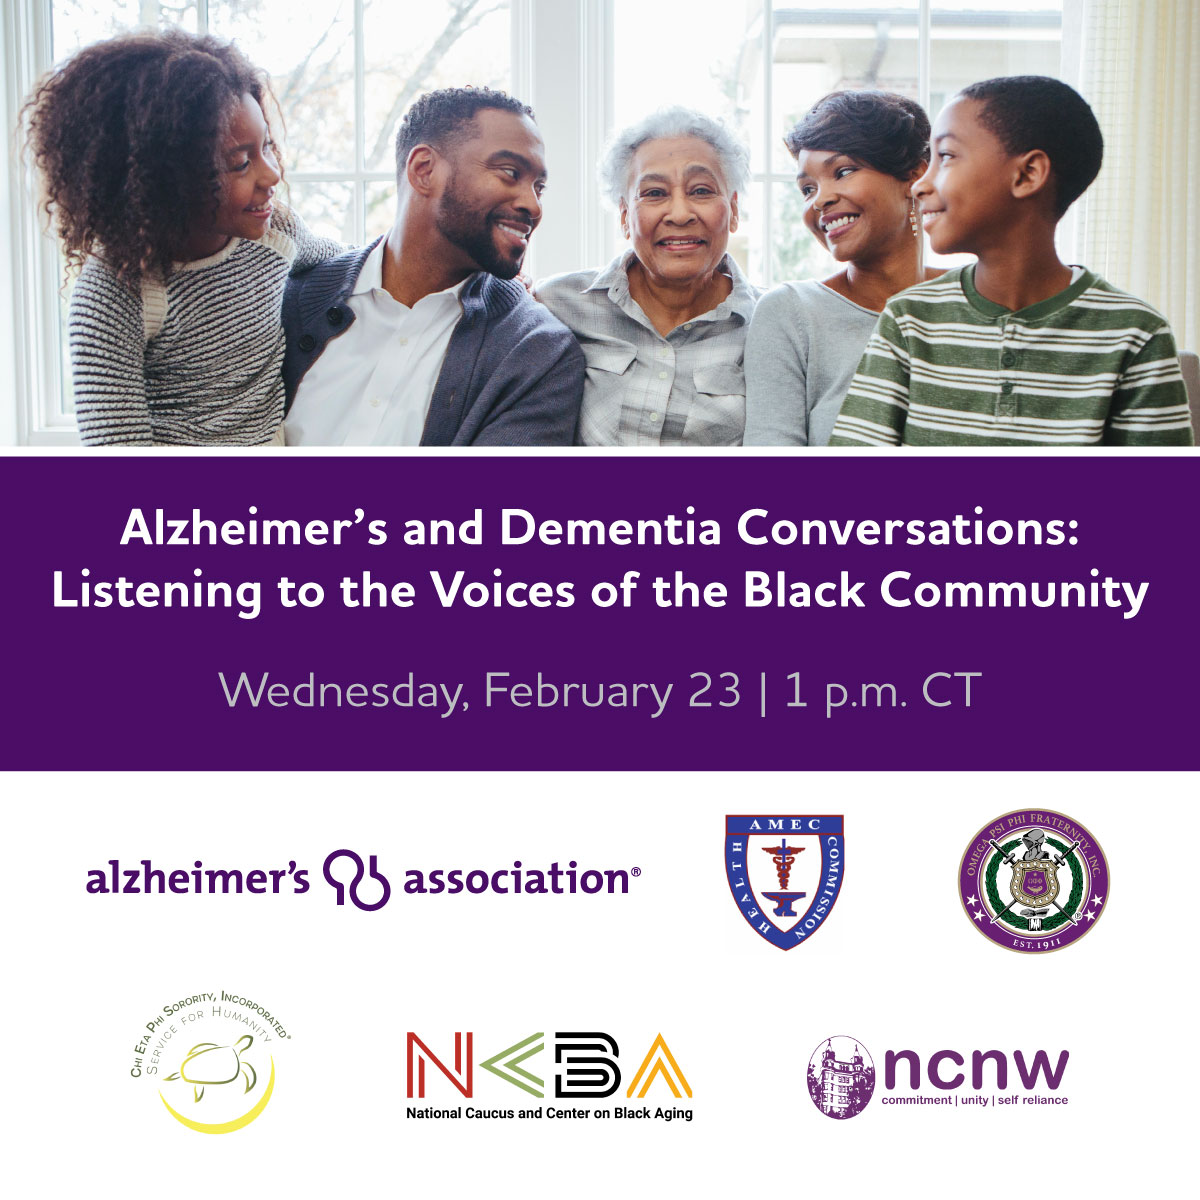 Join us and @alzassociation on Wednesday, Feb. 23 for a virtual forum on the historical and cultural perspectives facing Black Americans as it relates to Alzheimer’s and dementia care and the path toward a more equitable future. Register today at bit.ly/3tNfjBz. #ncnw